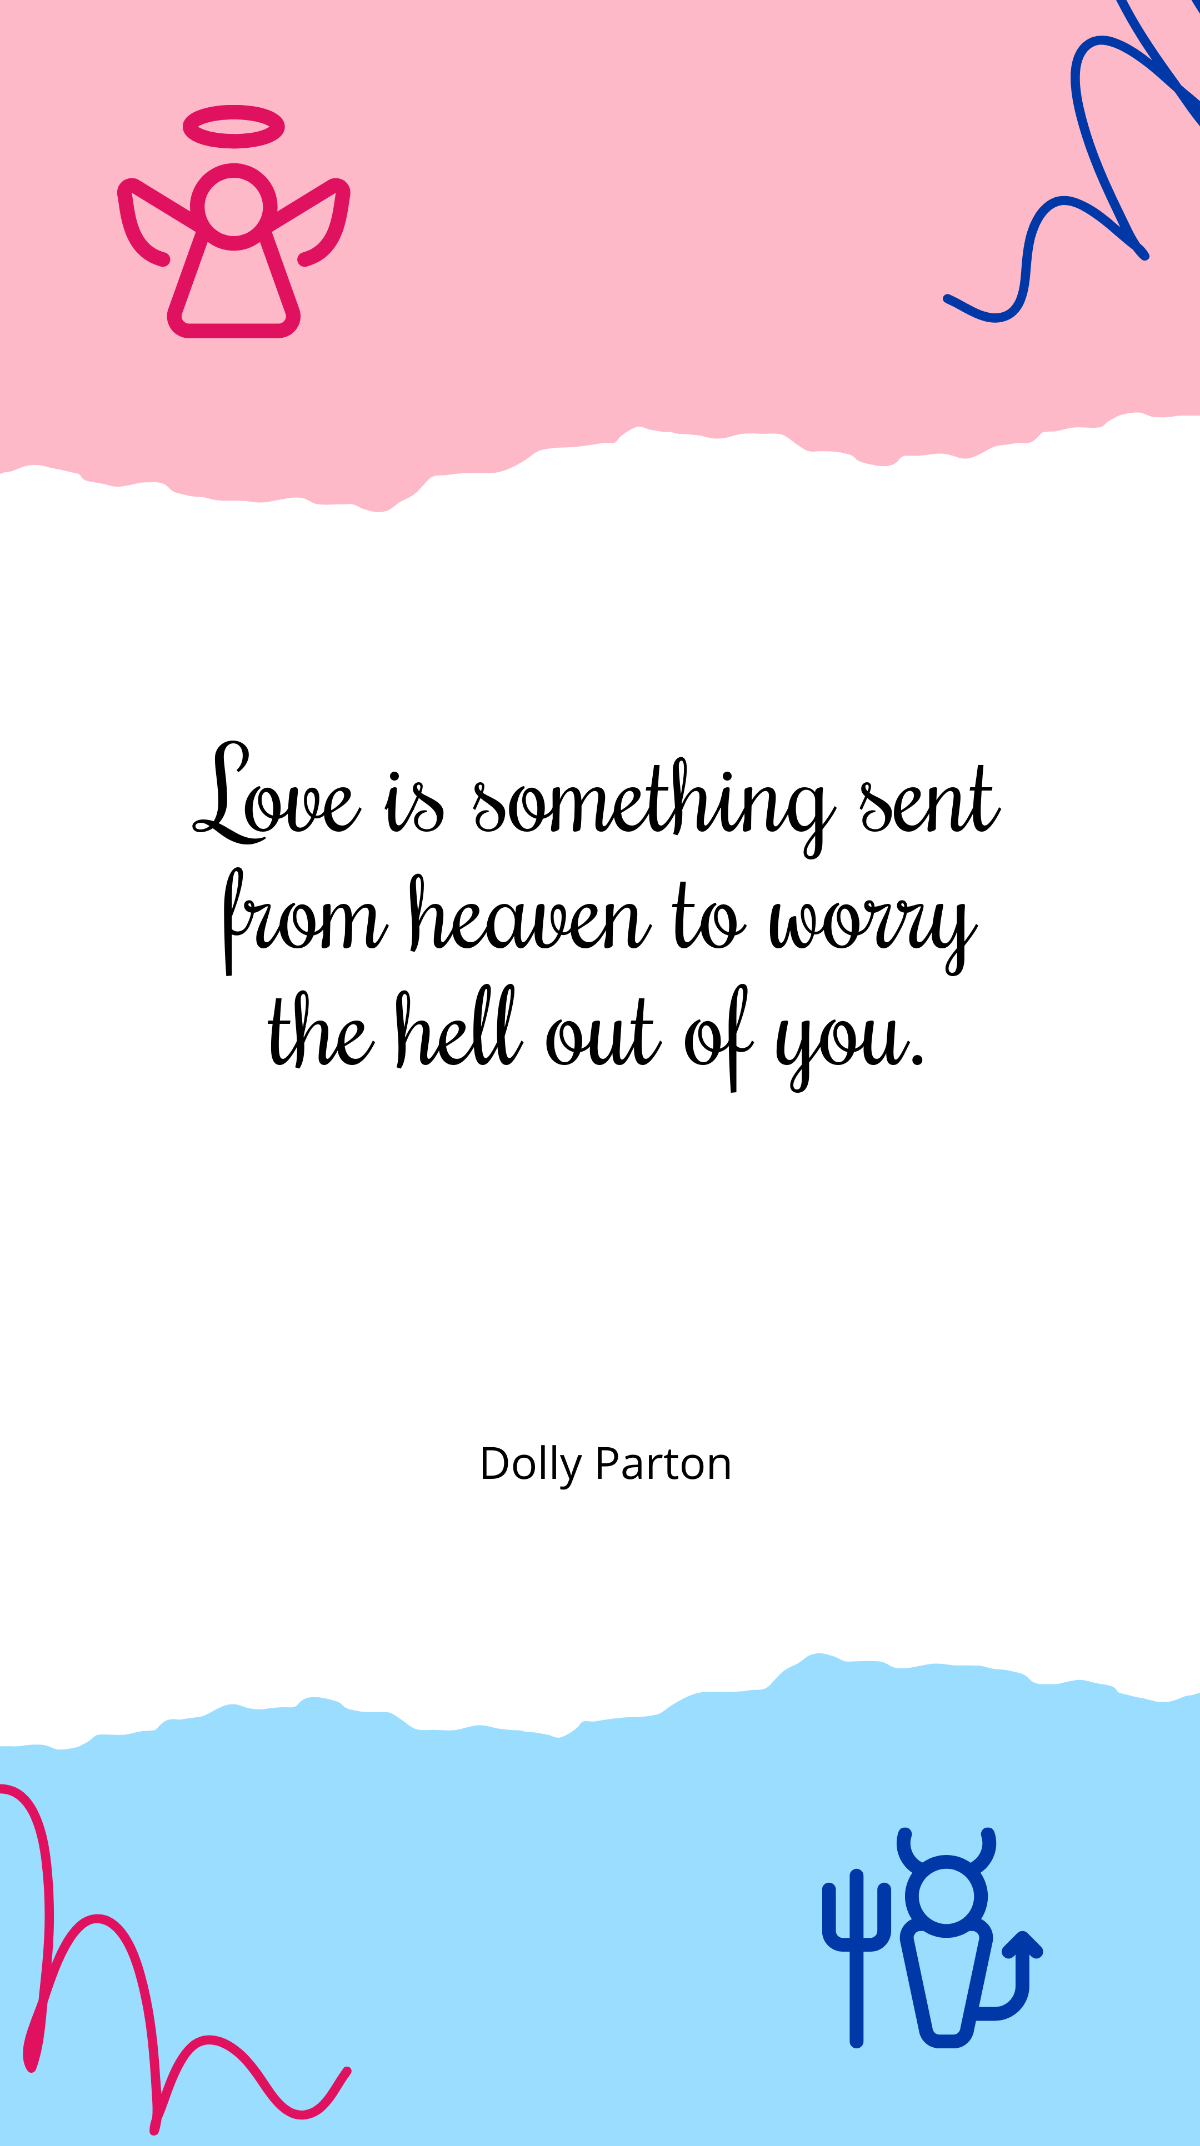 Dolly Parton - "Love is something sent from heaven to worry the hell out of you.”